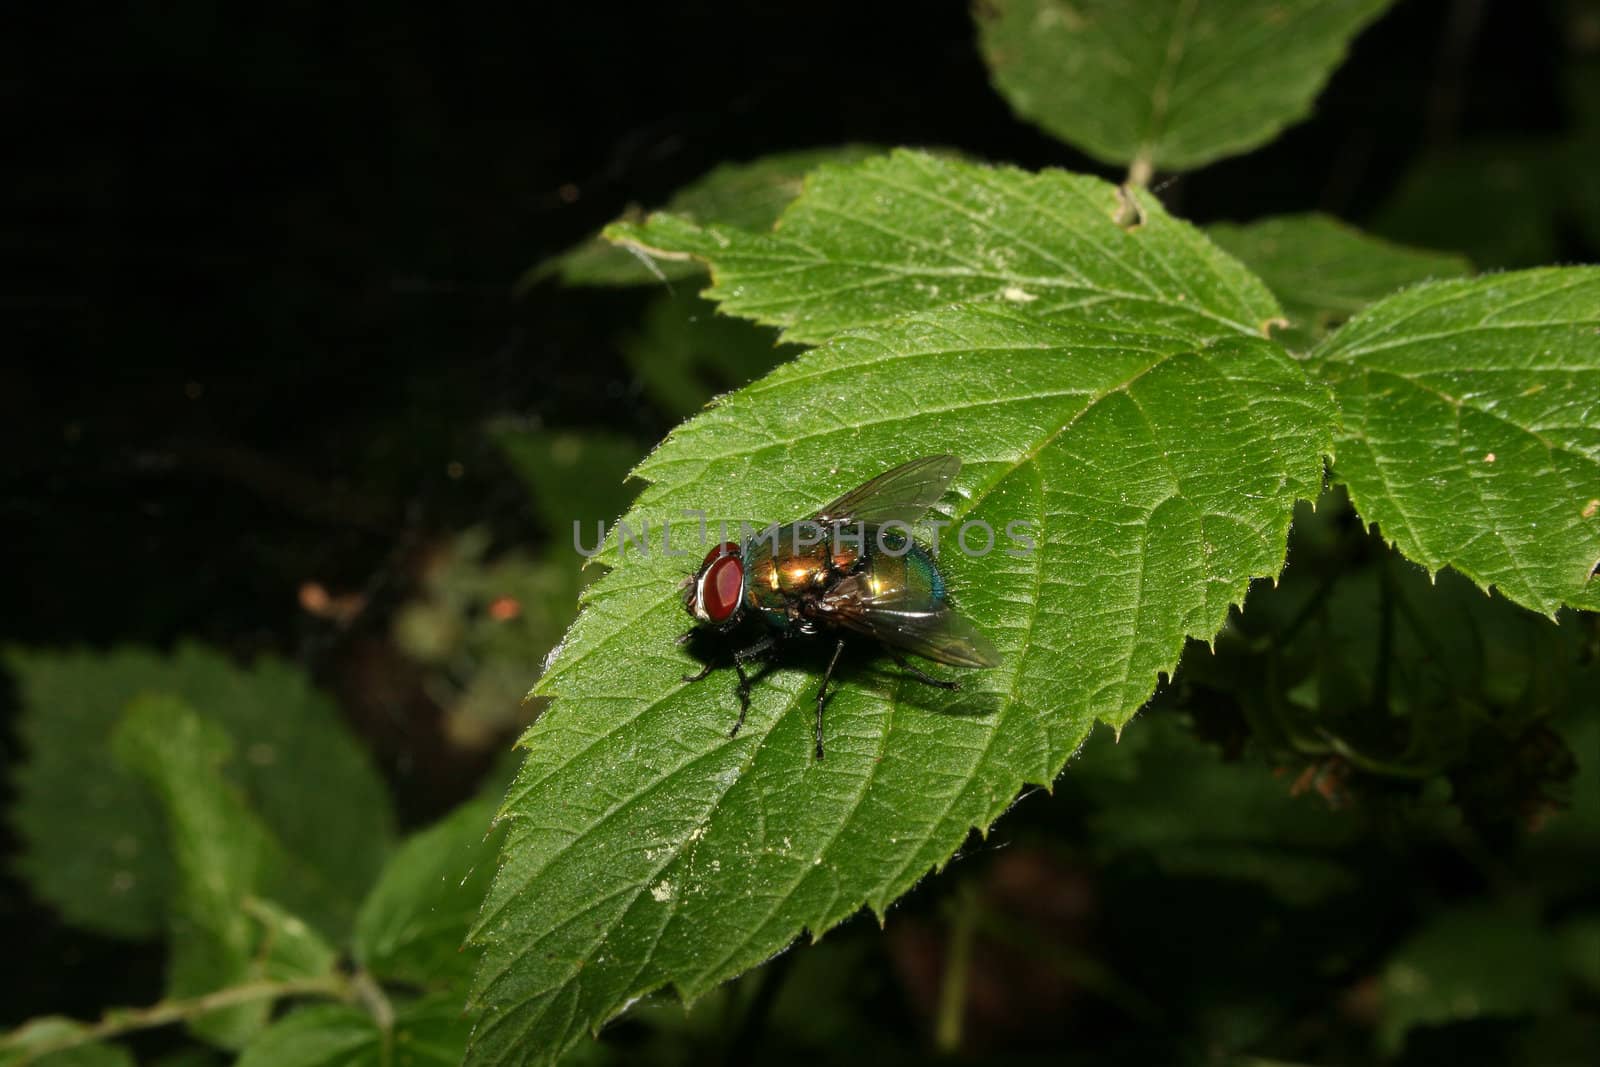 Common green bottle fly (Lucilia sericata) on a leaf